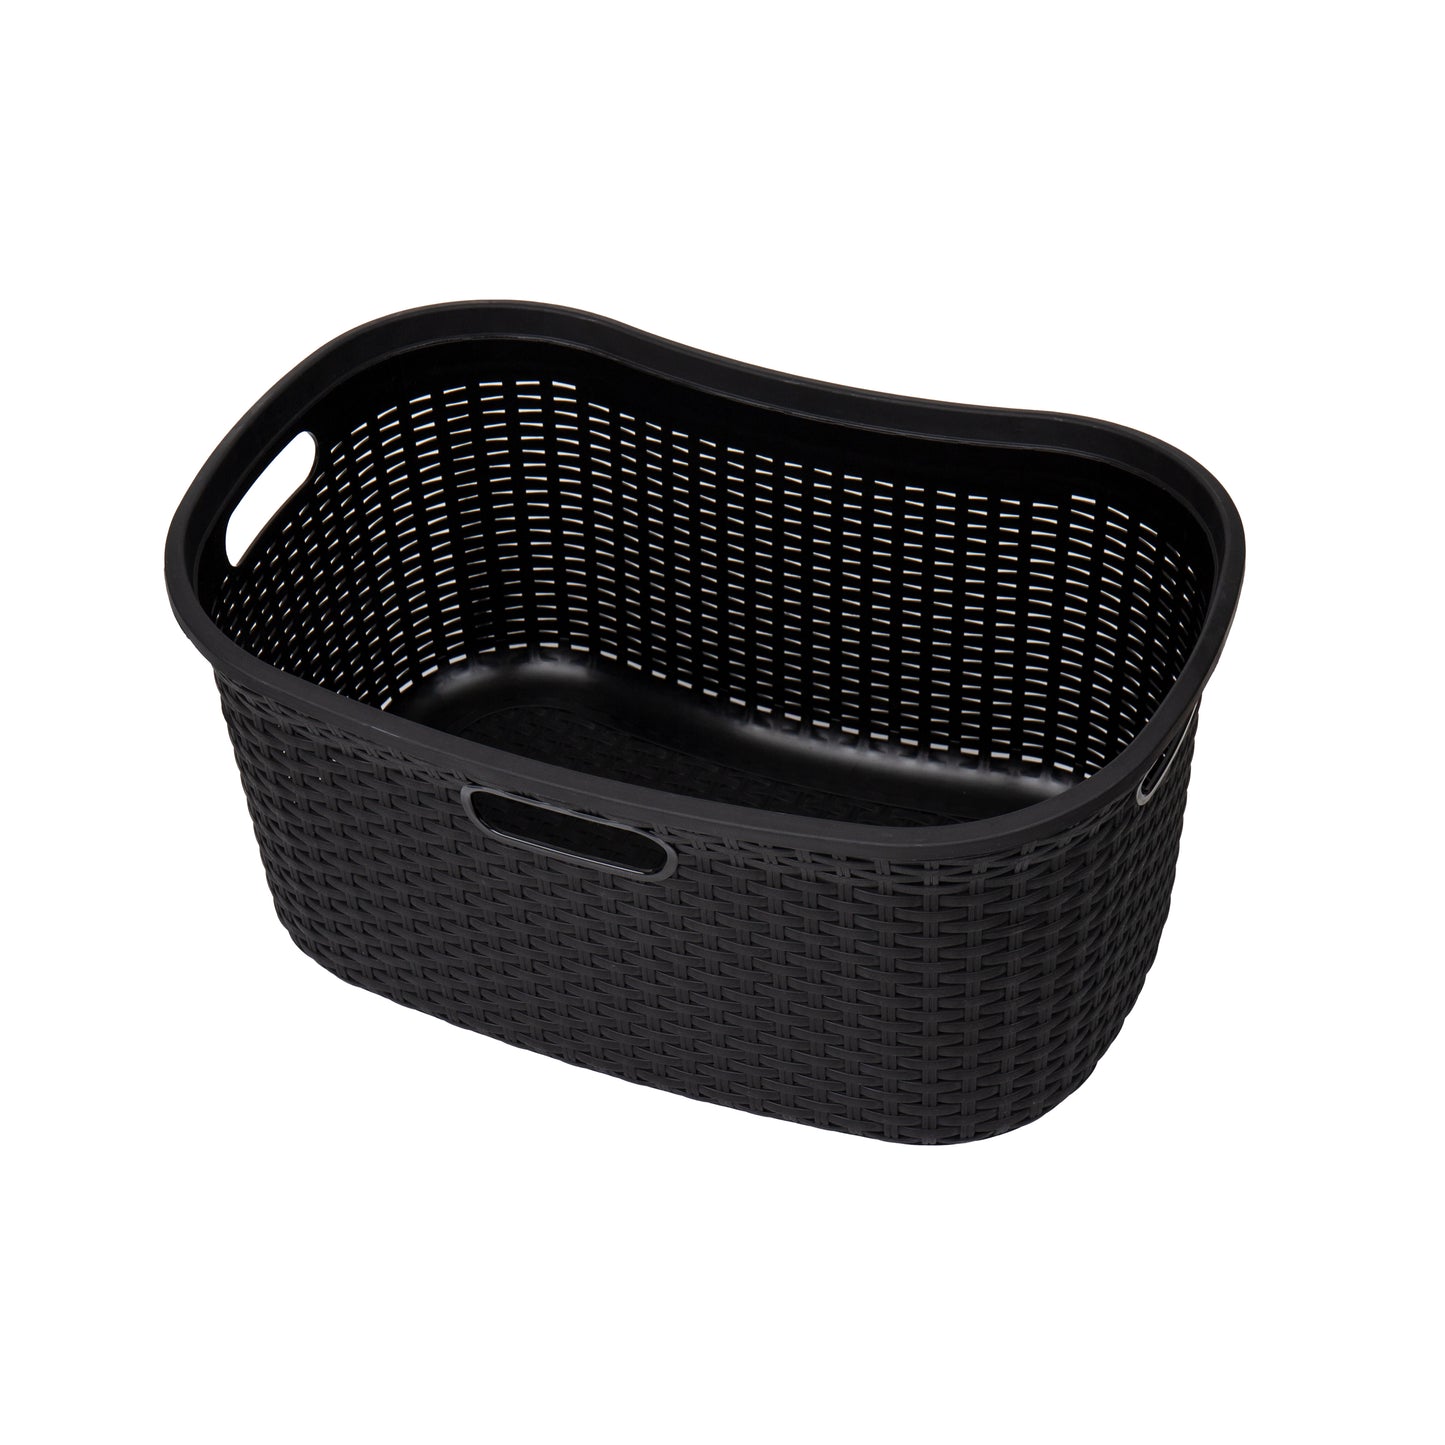 Mind Reader Basket Collection, Laundry Basket, 40 Liter (10kg/22lbs) Capacity, Premium Wicker Look, Cut Out Handles, Ventilated